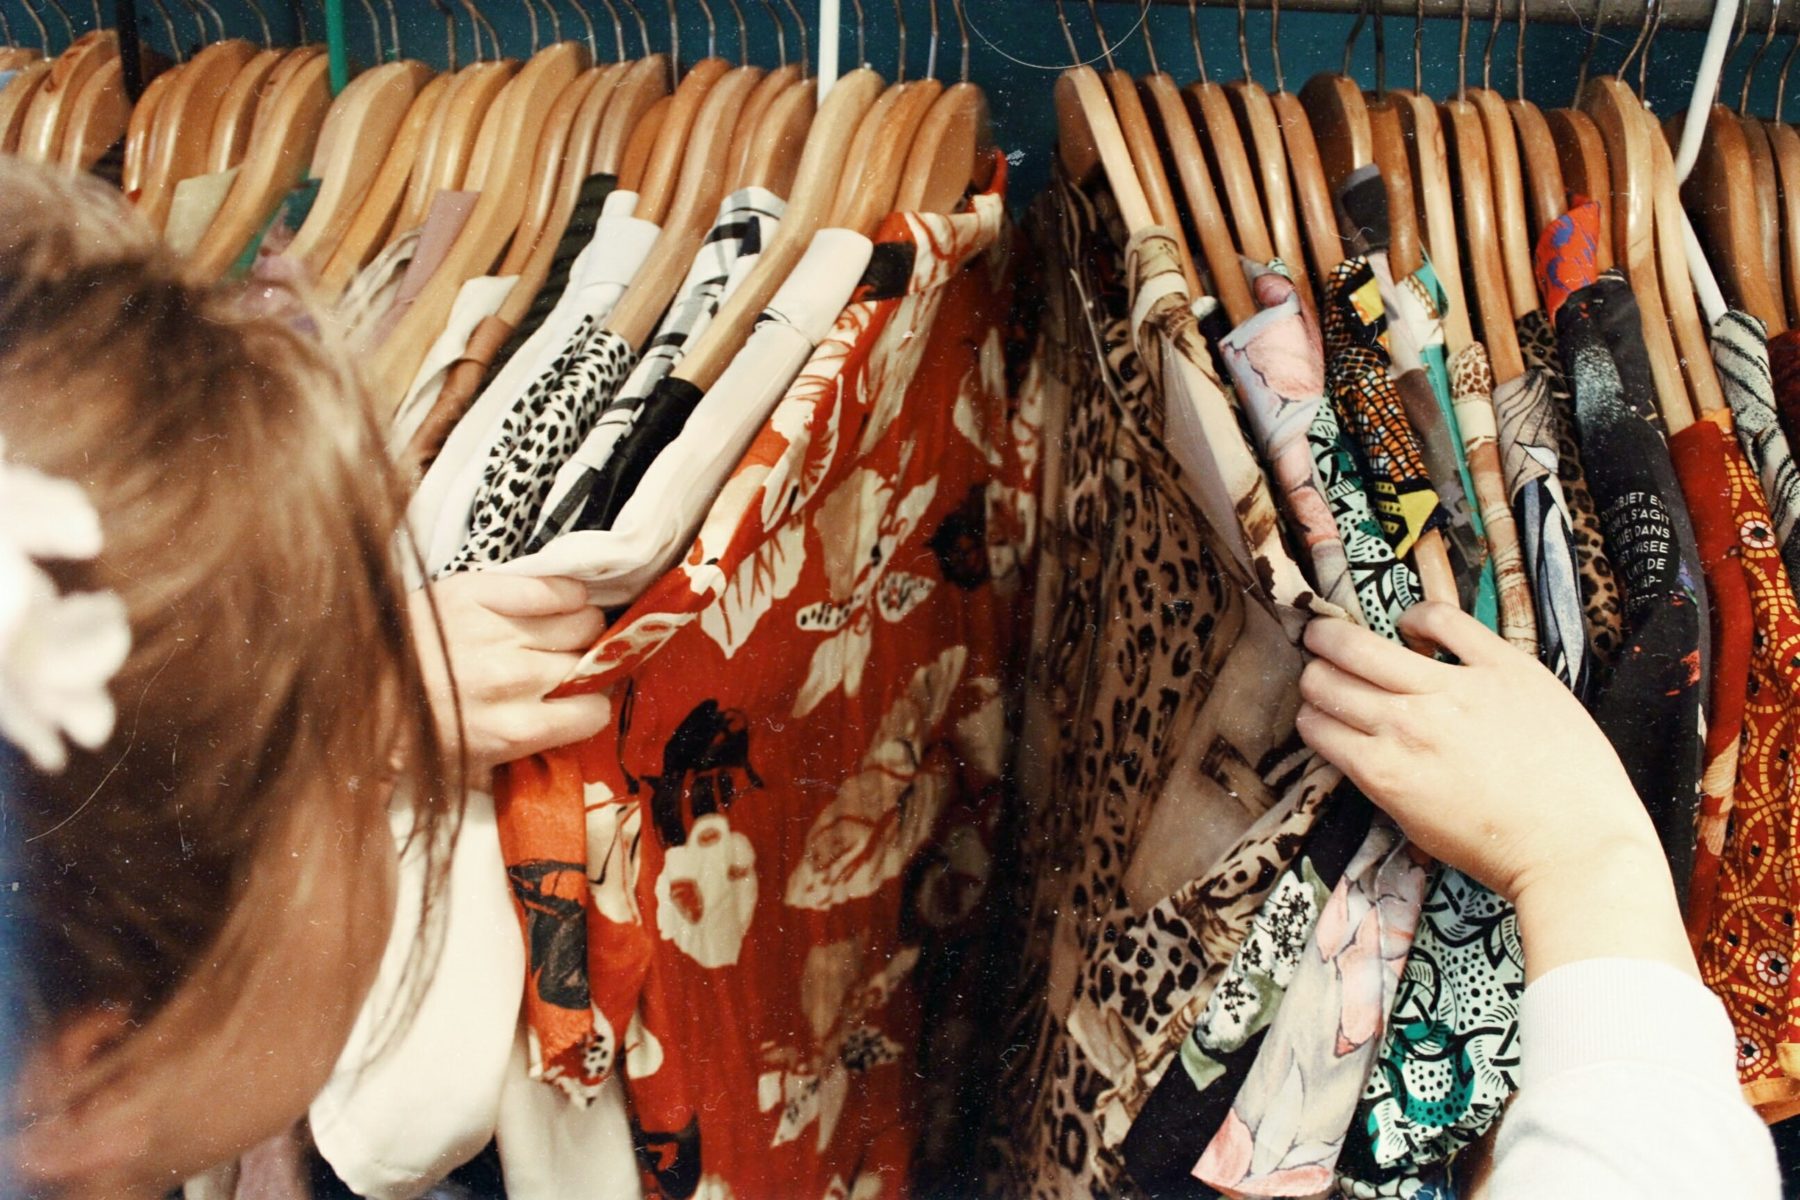 A young woman browsing through a rack of clothes.